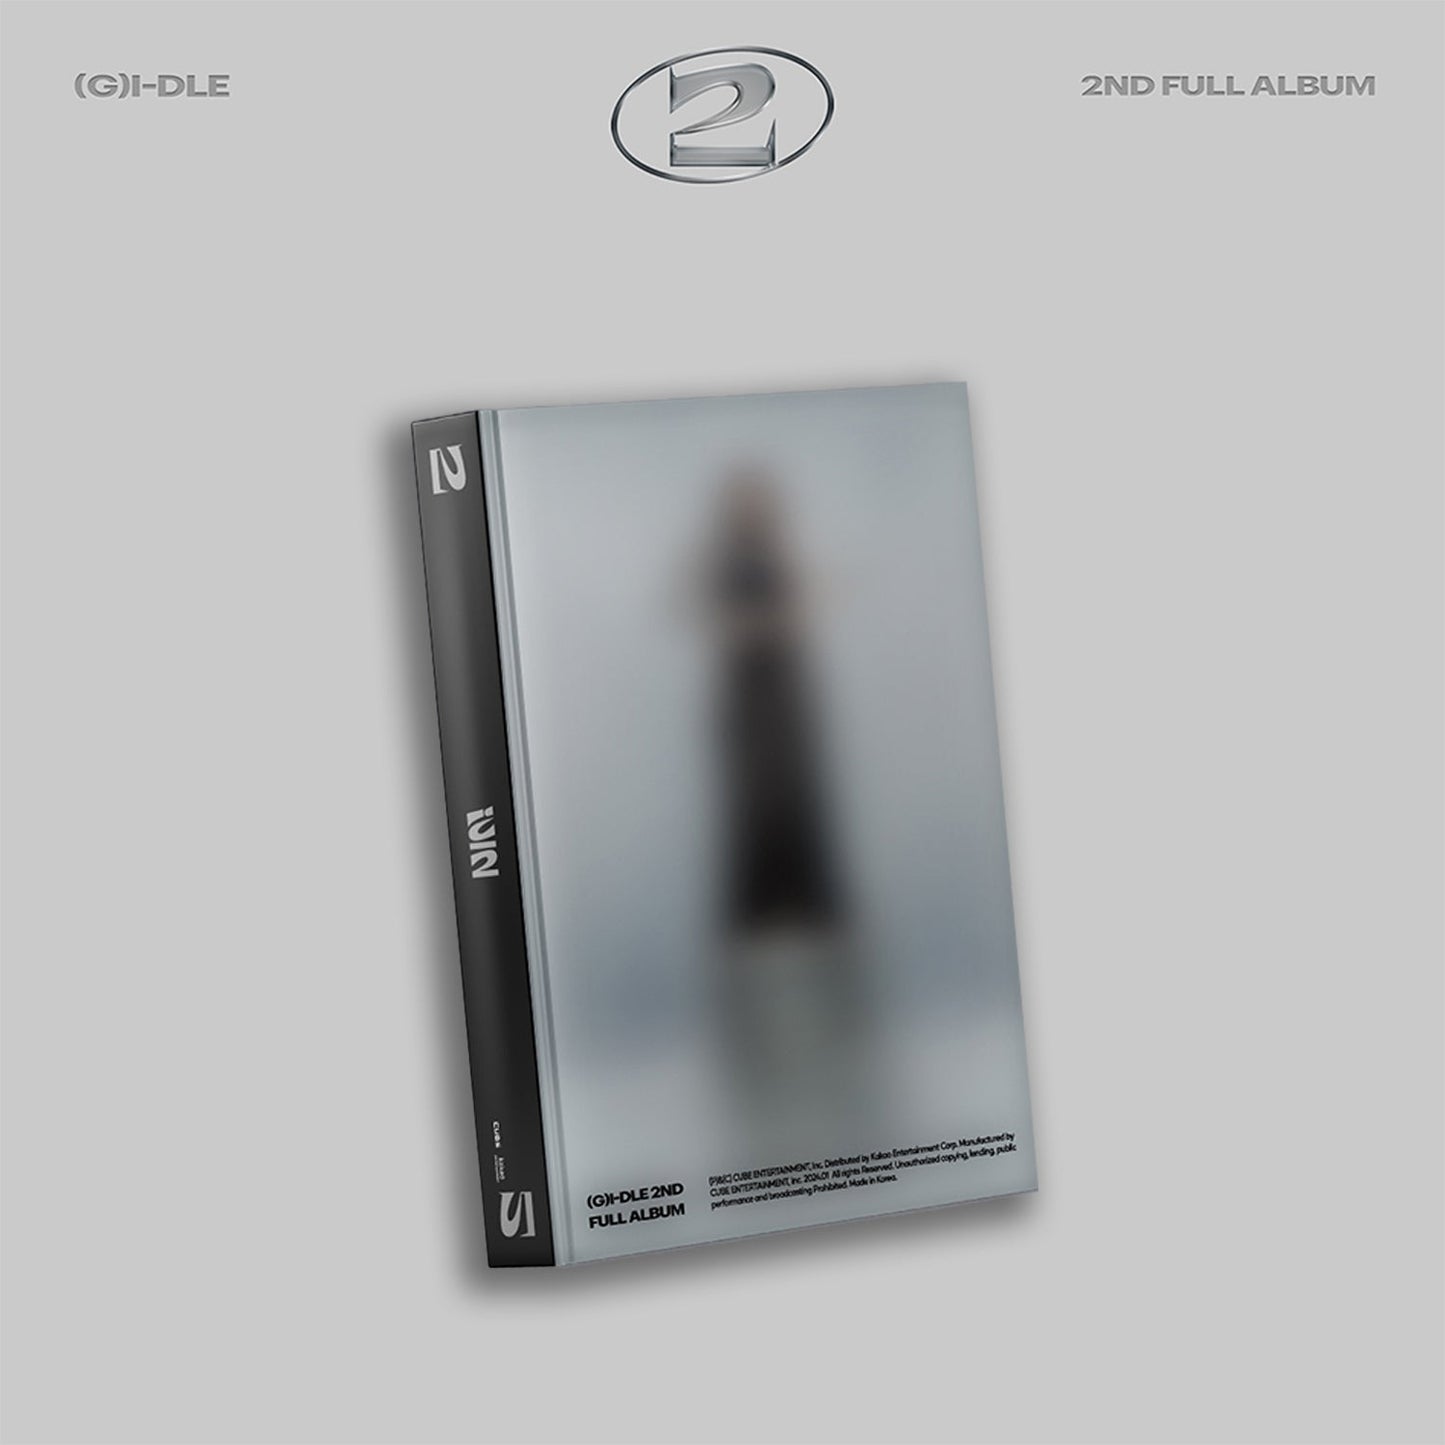 (G)I-DLE 2ND ALBUM '2' 0 VERSION COVER